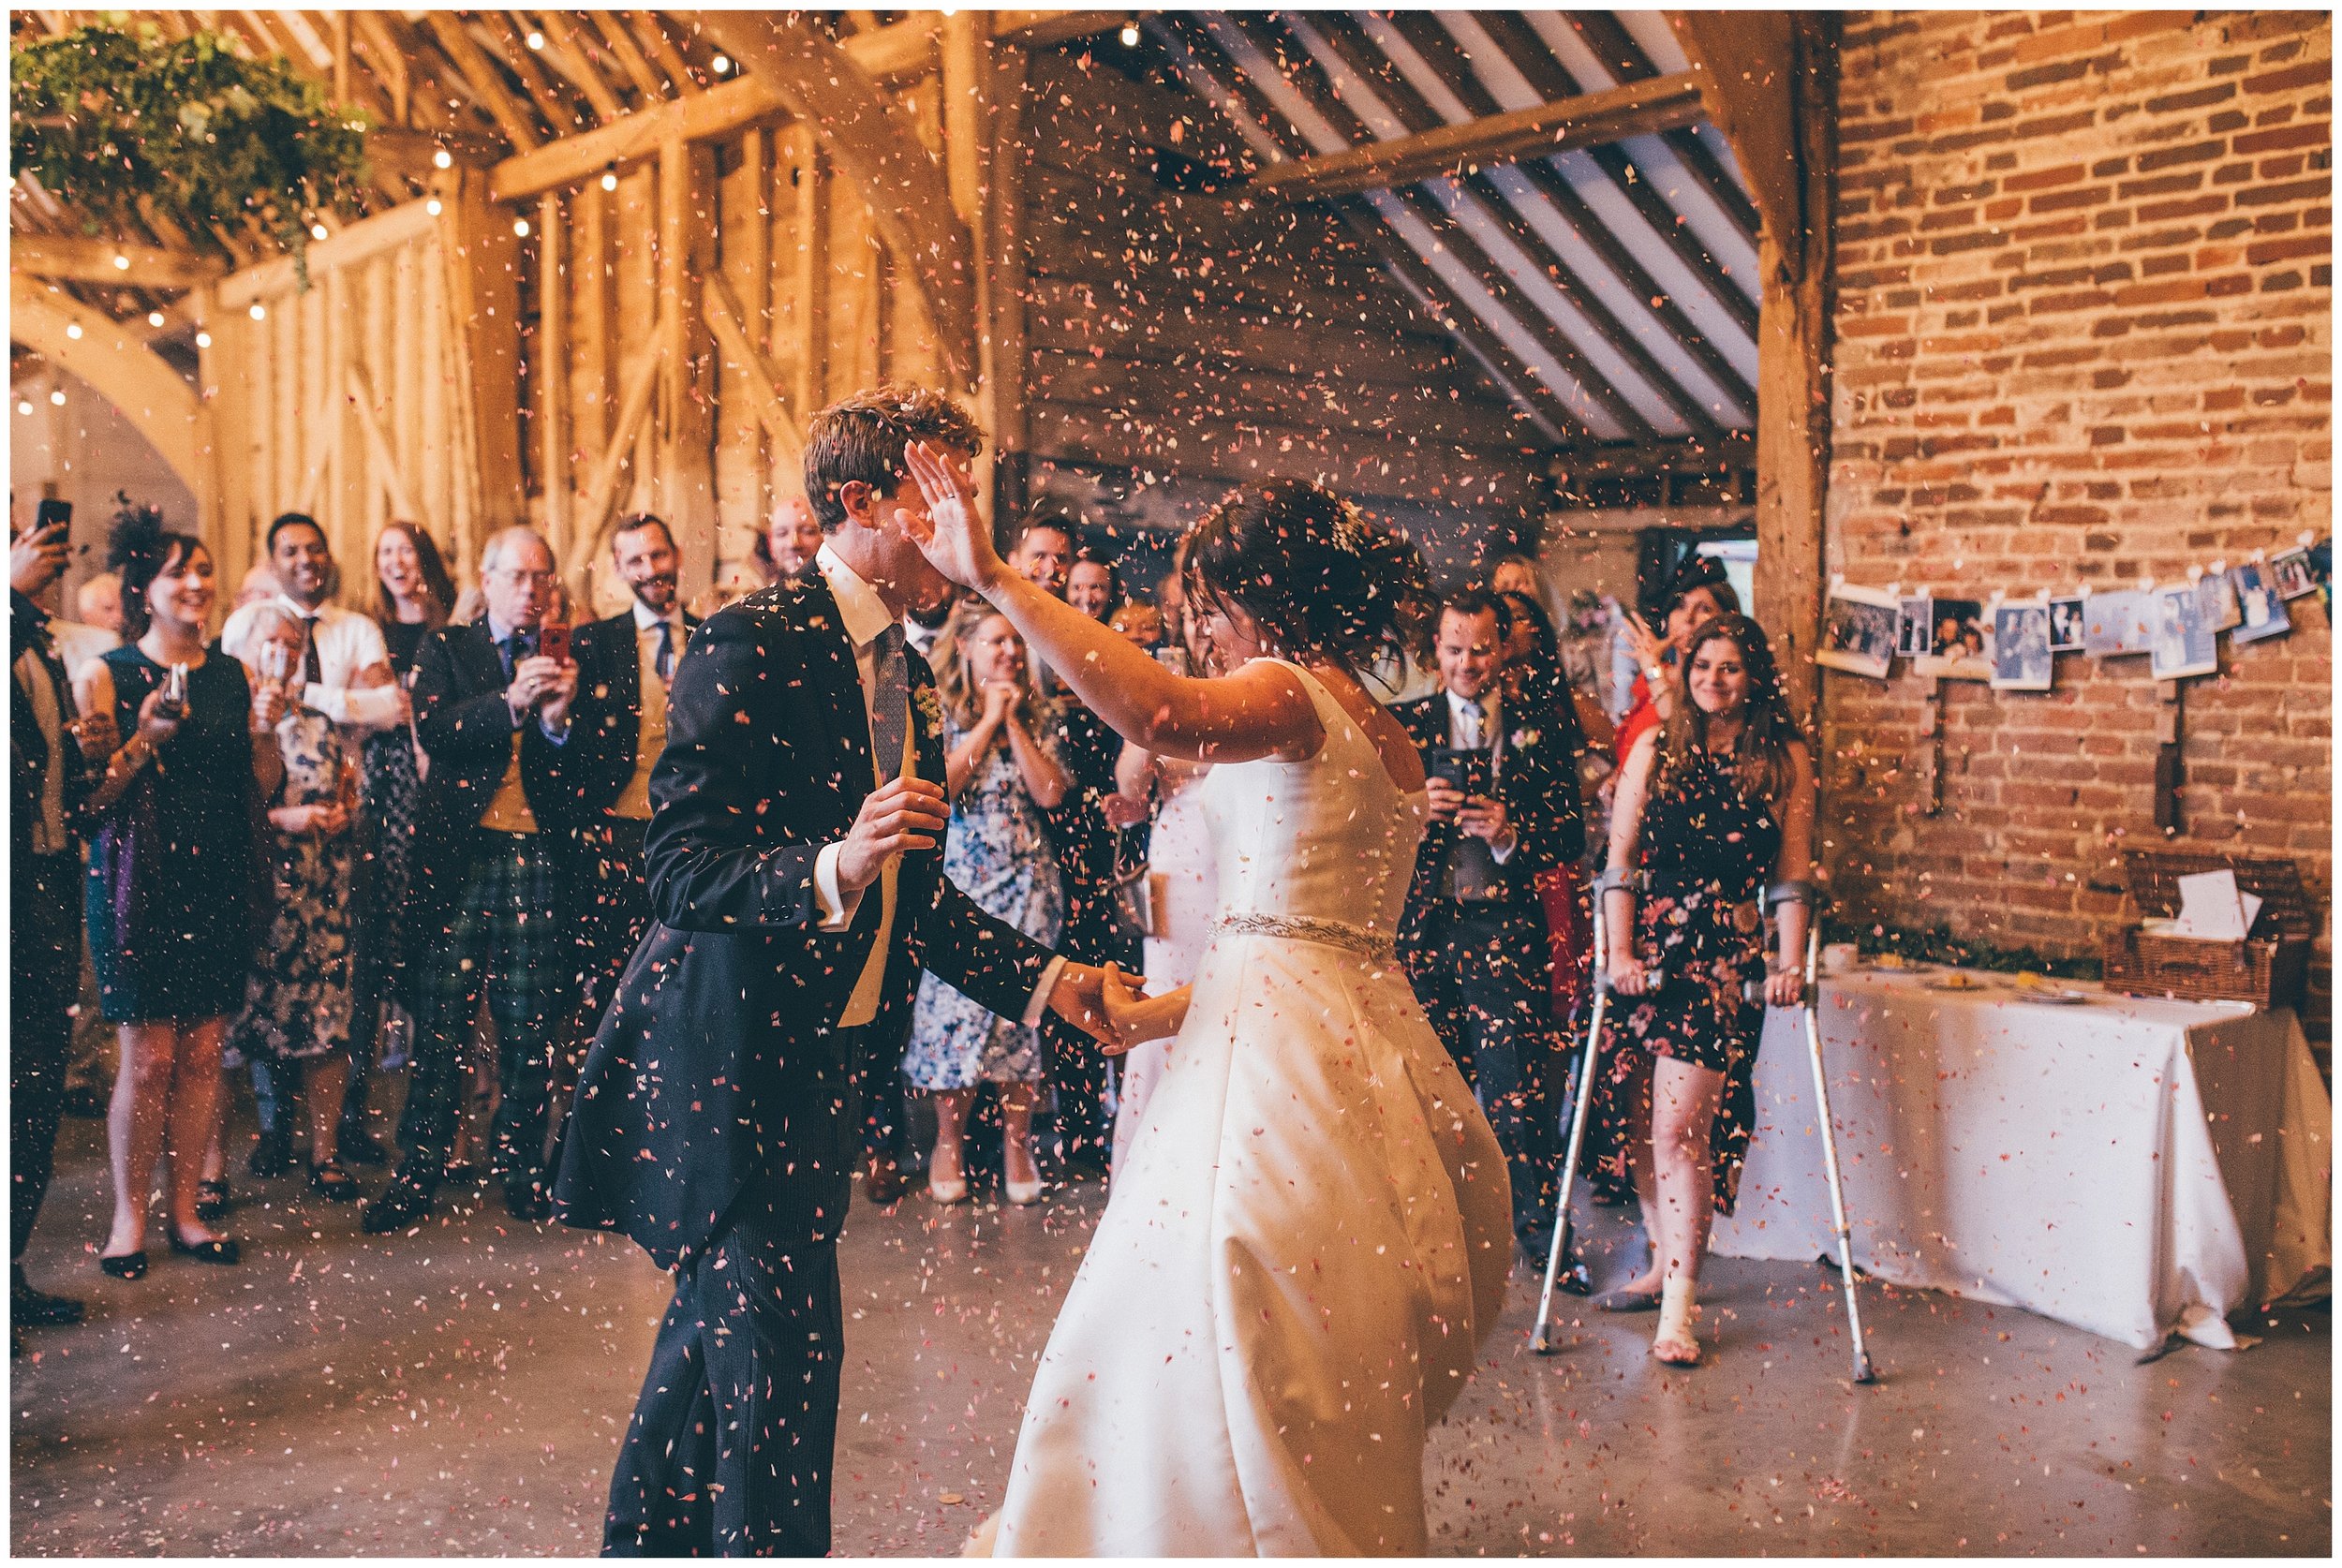 Confetti canon during the First Dance at Henham Park wedding barns in Southwold.